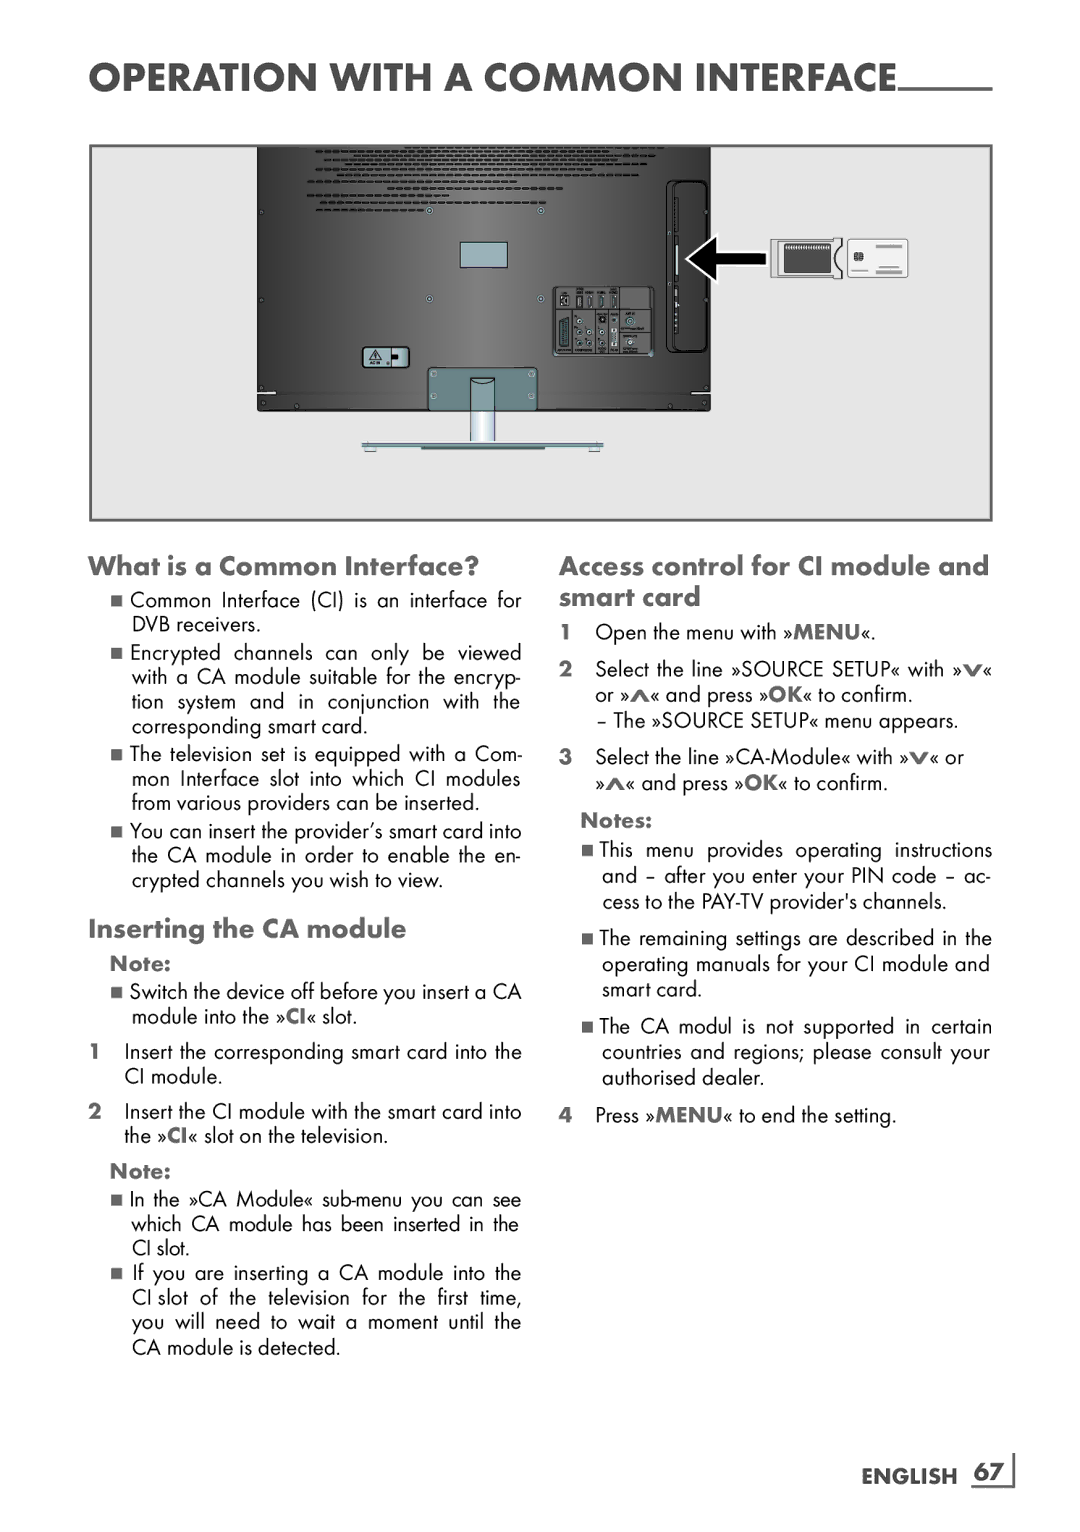 Grundig 40 CLE 8160 BL What is a Common Interface?, Inserting the CA module, Access control for CI module and smart card 